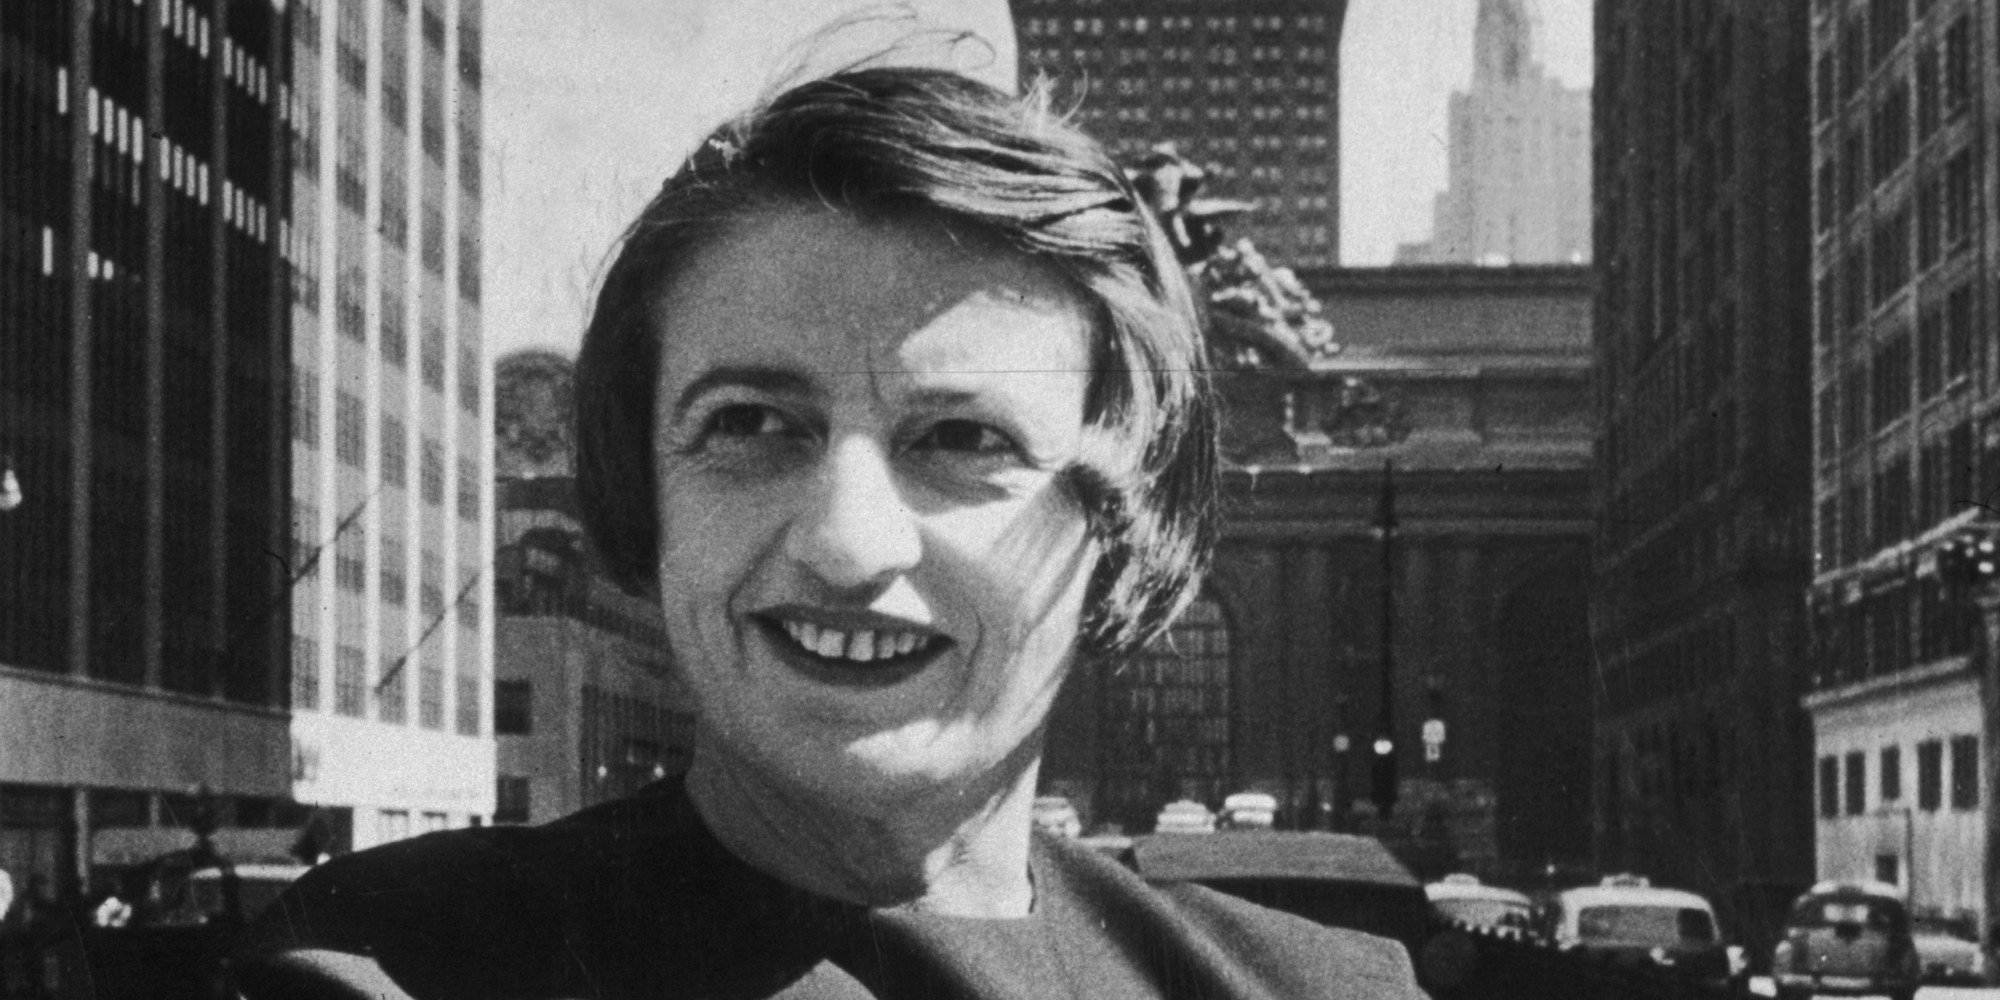 ayn rand was an avowed